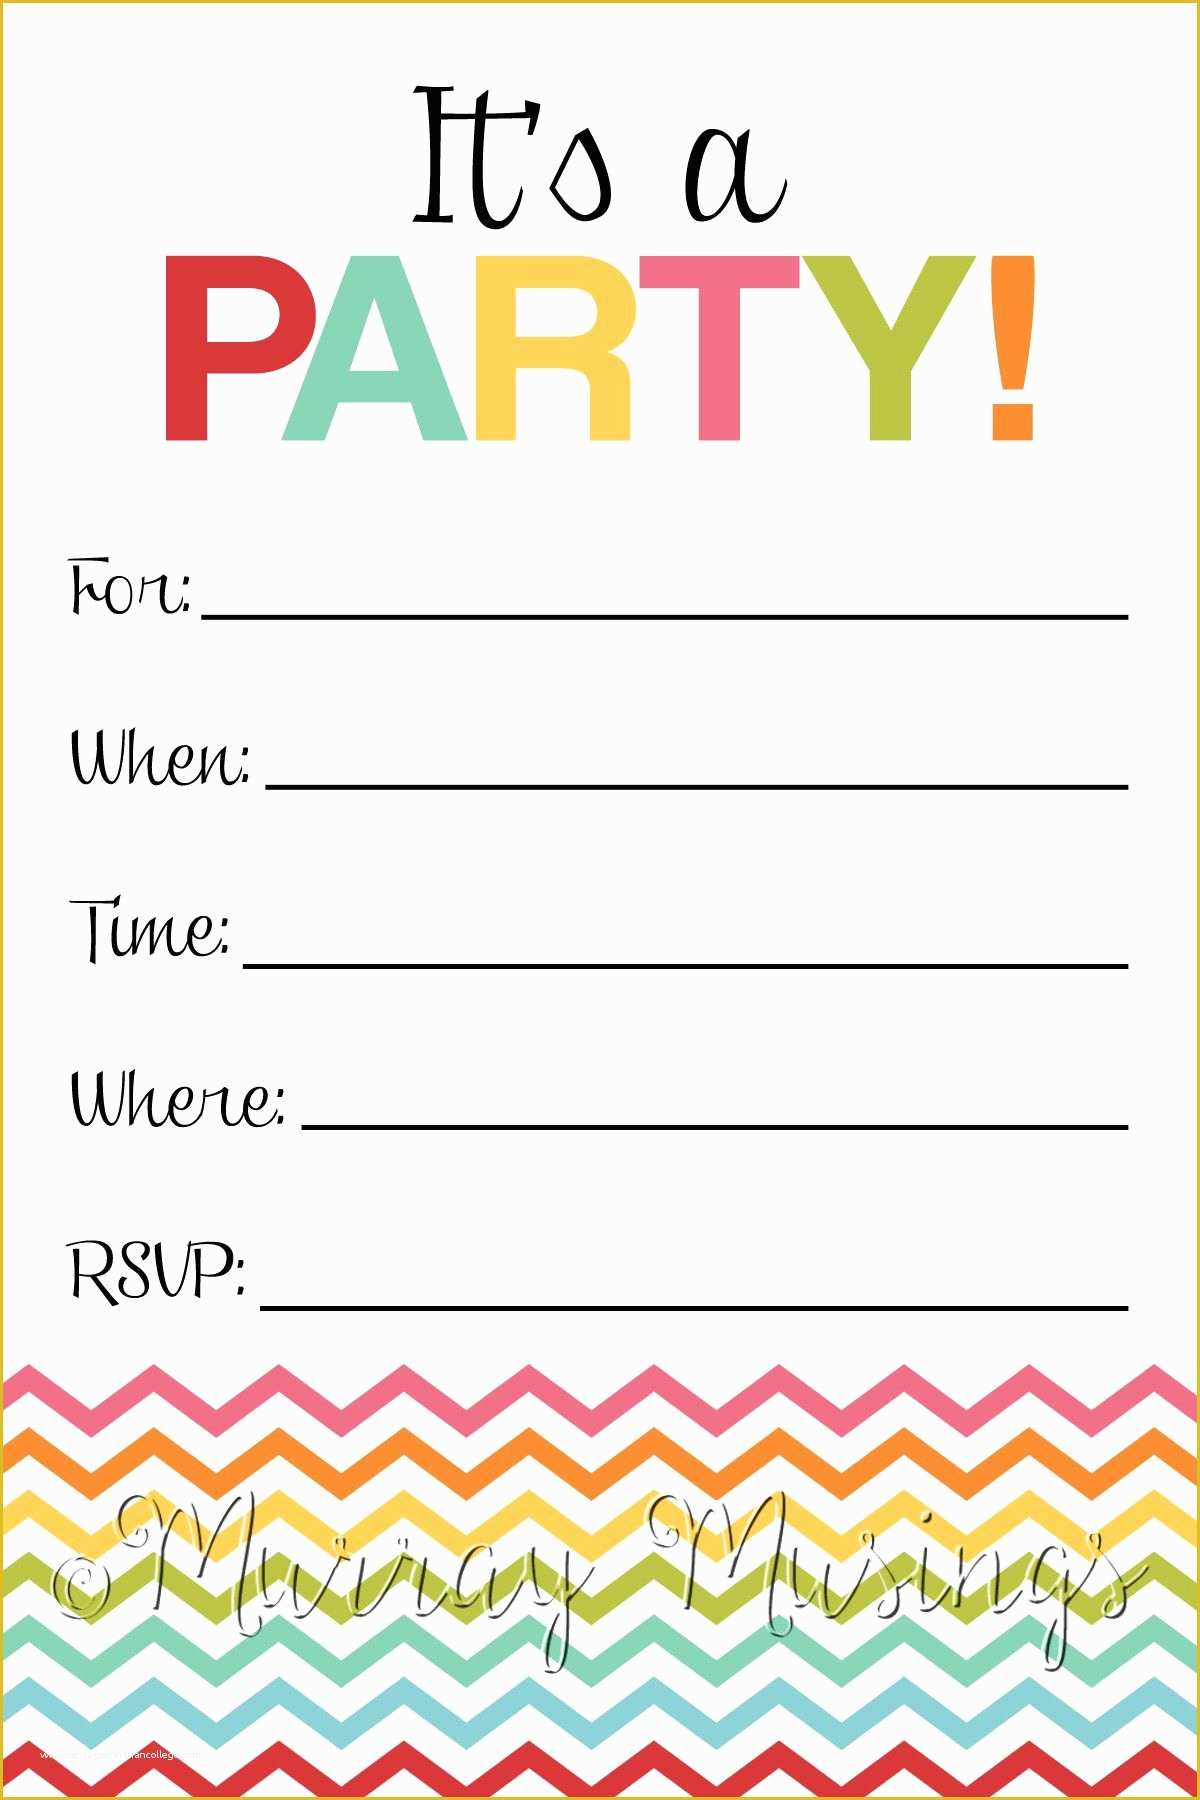 Free Printable Surprise Birthday Invitations Template Of Chevron Fill In the Blank Birthday Party Invitation